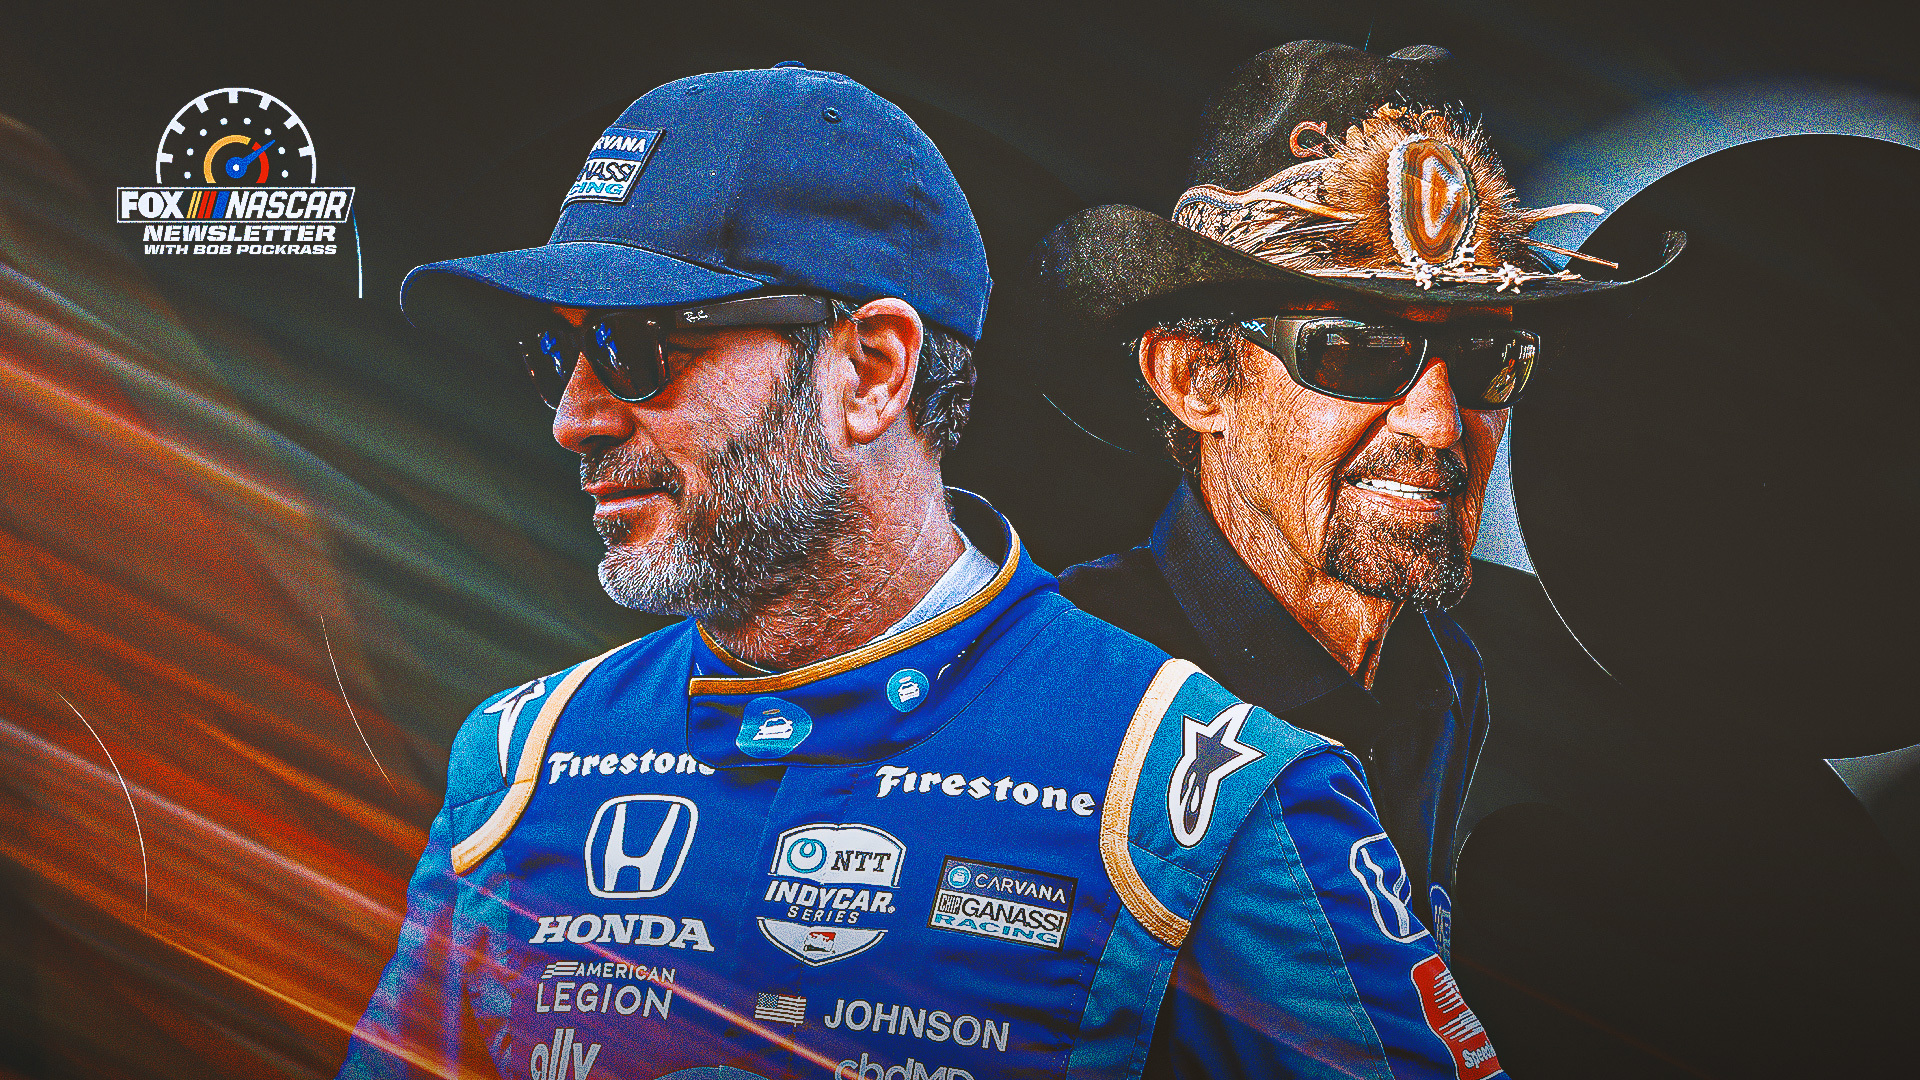 Jimmie Johnson, Petty GMS Racing group rebrands to Legacy Motor Club